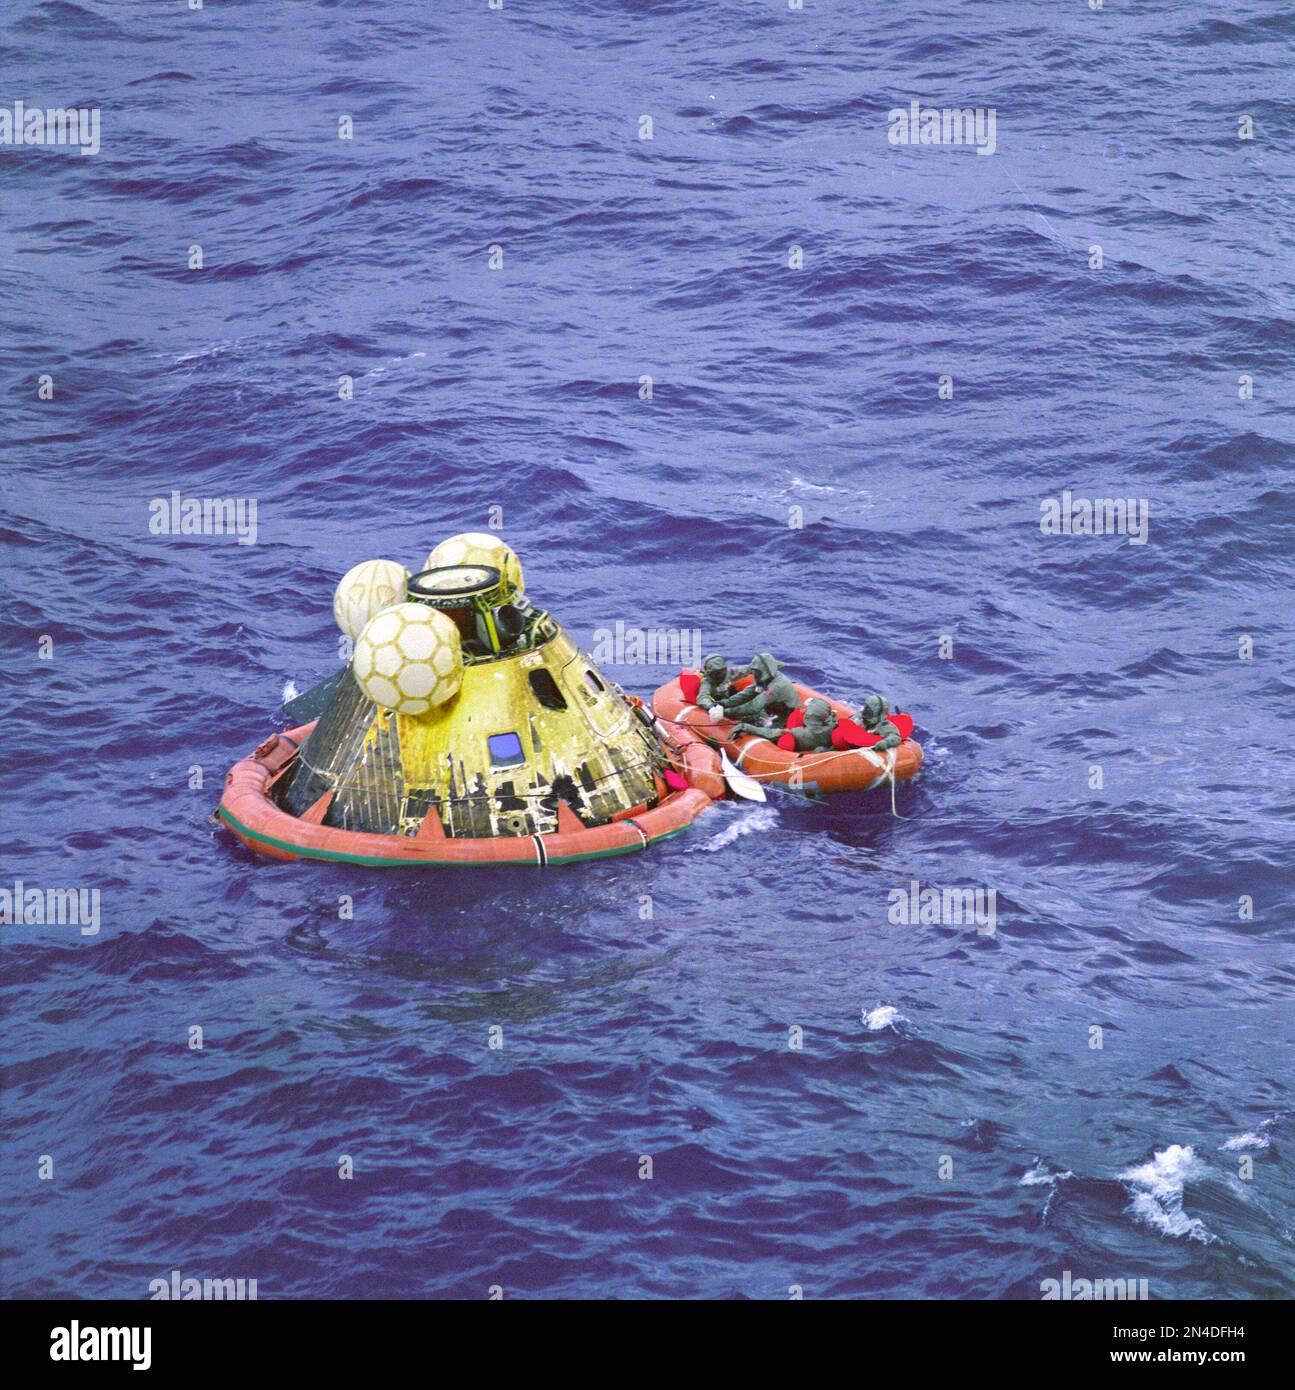 The Apollo 11 crew await pickup by a helicopter from the USS Hornet, prime recovery ship for the historic Apollo 11 lunar landing mission. The fourth man in the life raft is a United States Navy underwater demolition team swimmer. All four men are wearing Biological Isolation Garments (BIG). The Apollo 11 Command Module 'Columbia,' with astronauts Neil A. Armstrong, Michael Collins, and Edwin E. Aldrin Jr. splashed down at 11:49 a.m. (CDT), July 24, 1969, about 812 nautical miles southwest of Hawaii and only 12 nautical miles from the USS Hornet. Stock Photo